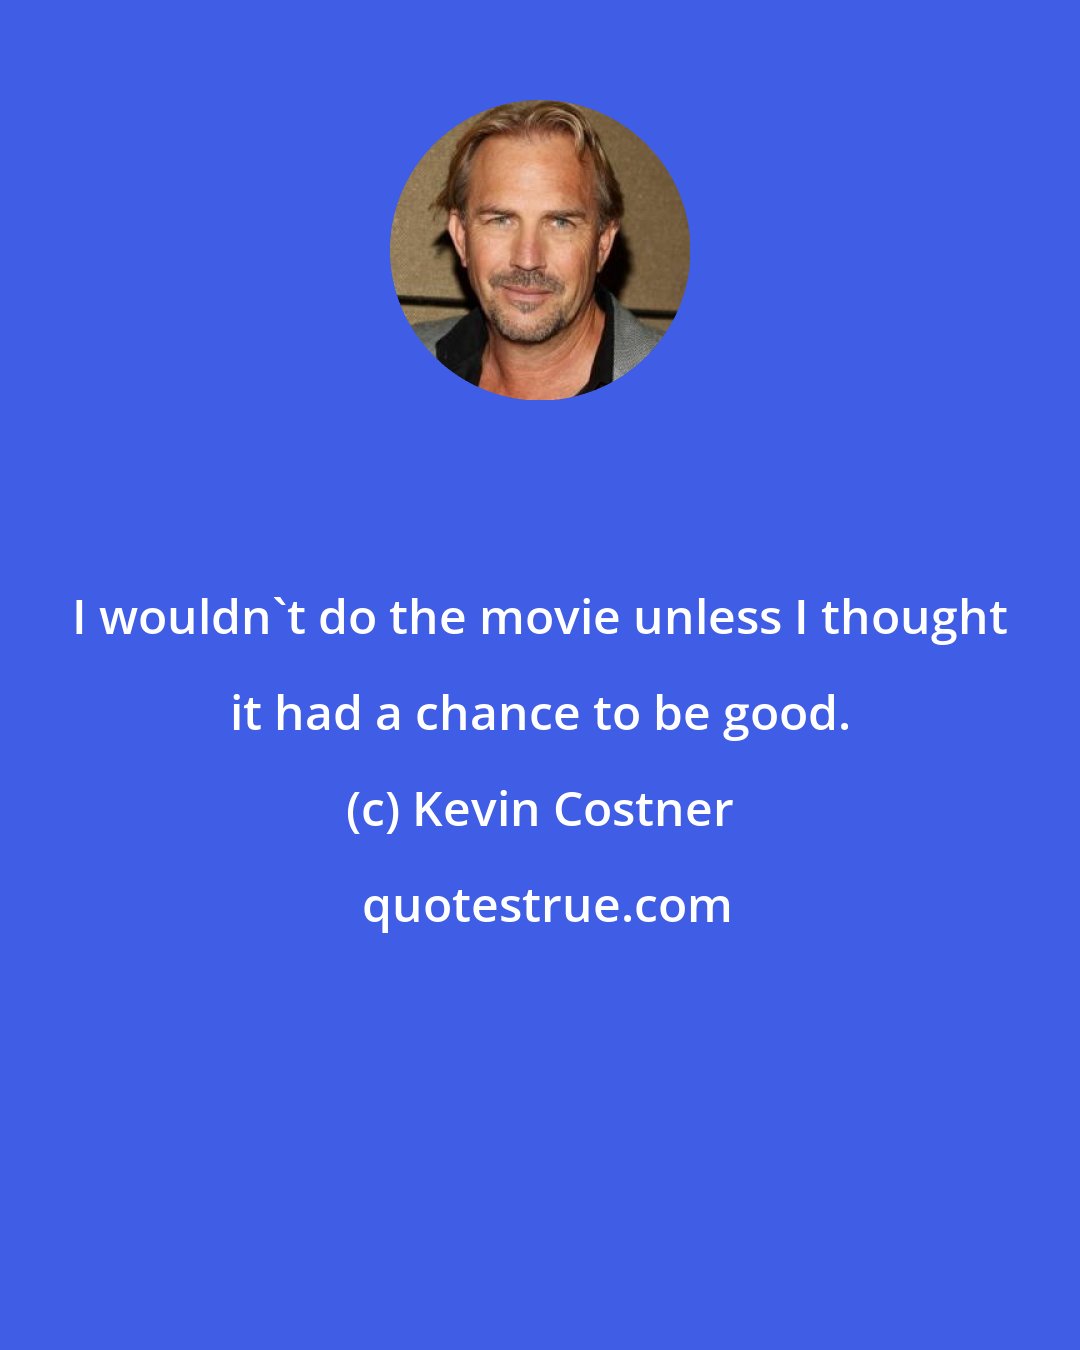 Kevin Costner: I wouldn't do the movie unless I thought it had a chance to be good.